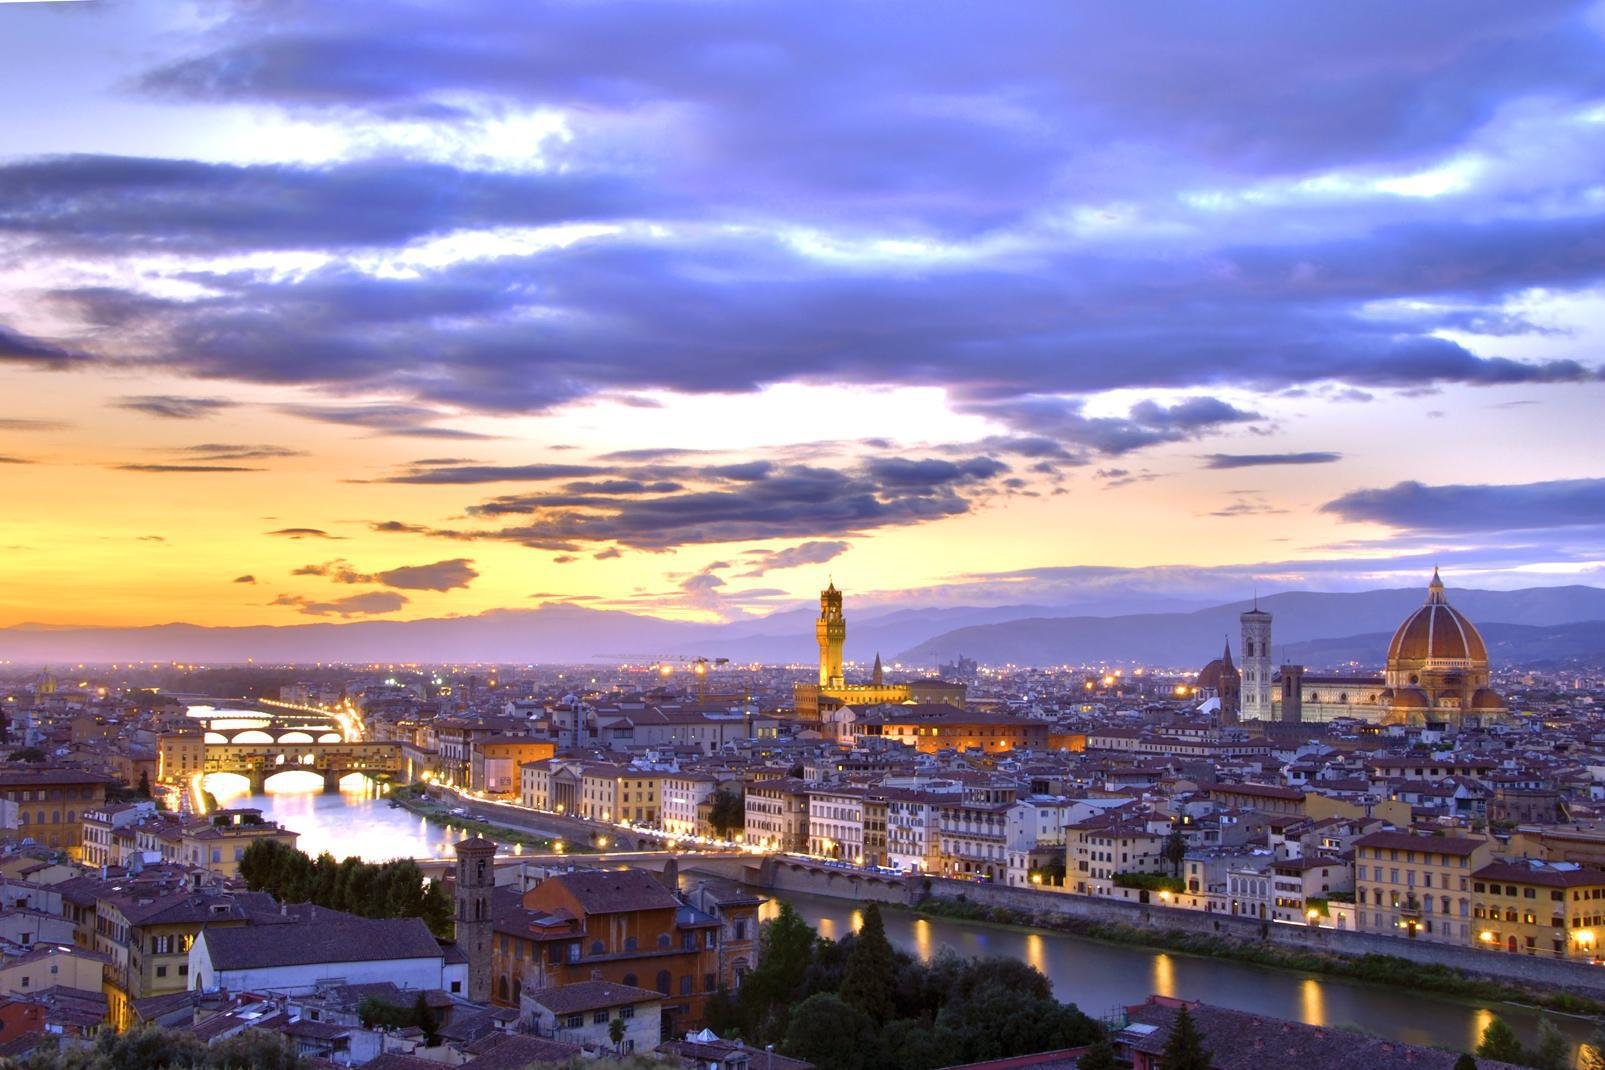 In Florence, wander through the streets around the Duomo, then go on to Piazza San Firenze, where you will find the Bargello (a 13th Century barracks and prison that now houses a broad selection of Florentine sculptures). On the way, you will discover the home of Dante on via Dante Alighieri. Continue to the Mercato Nuovo arcades and end at the splendid Boboli gardens which are on the hill at the end ...